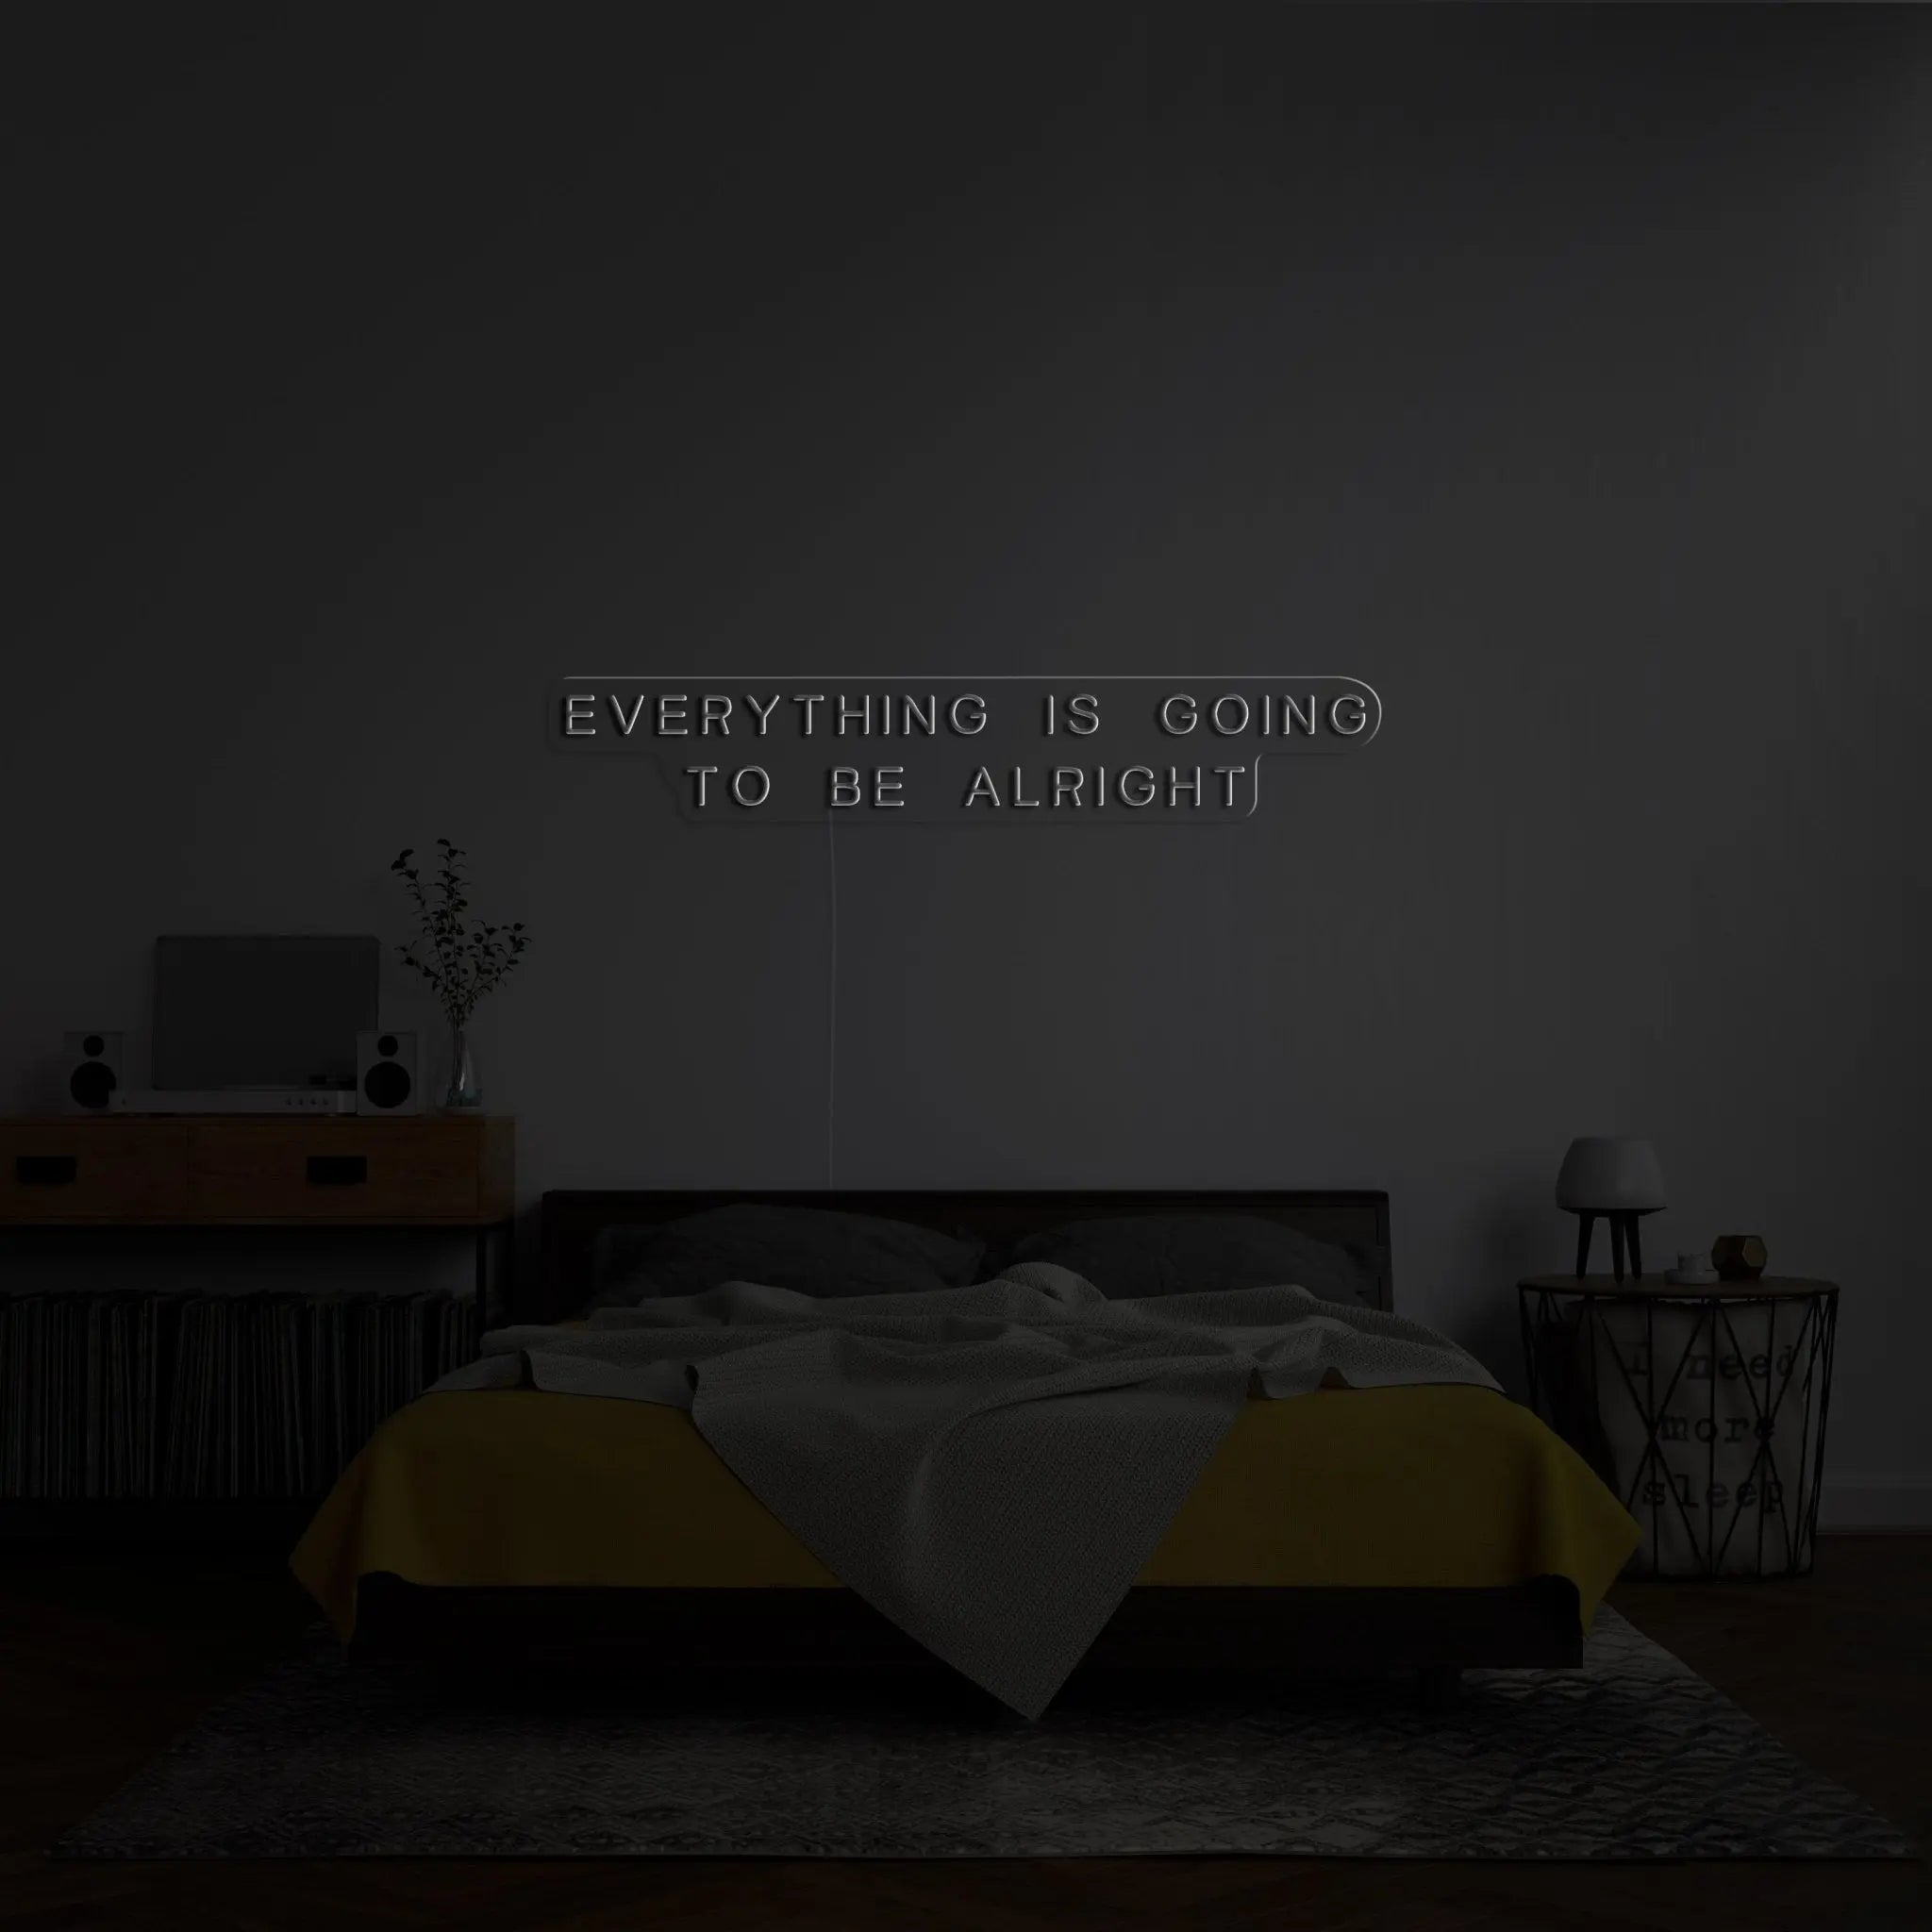 'EVERYTHING IS GOING TO BE ALRIGHT' Neon Sign - neonaffair